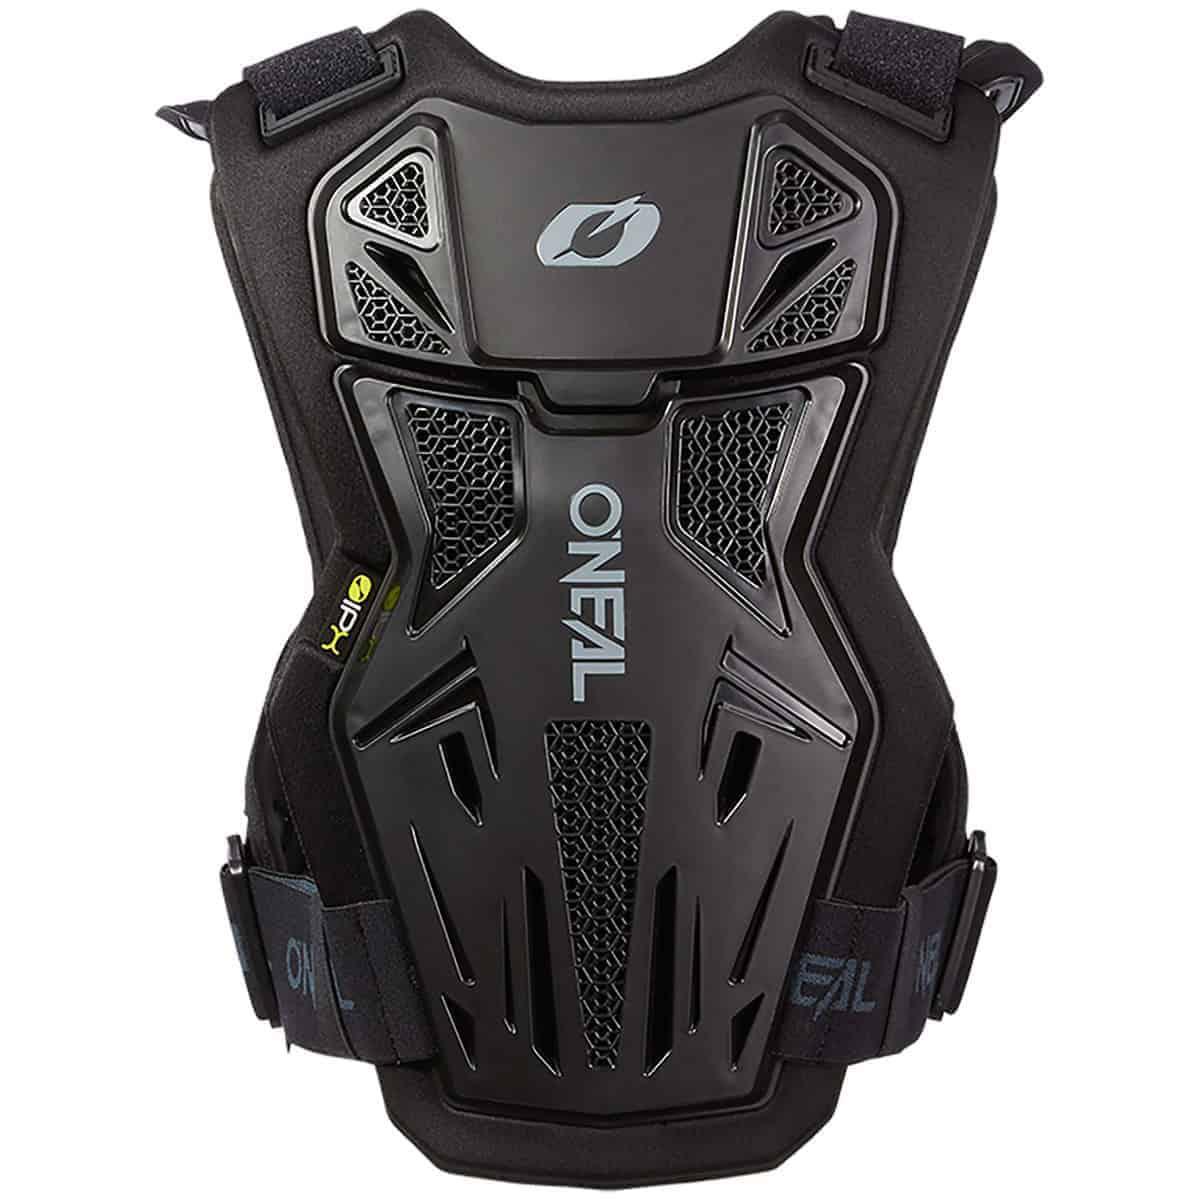 This Split Lite chest protector from ONeal provides impact protection 2